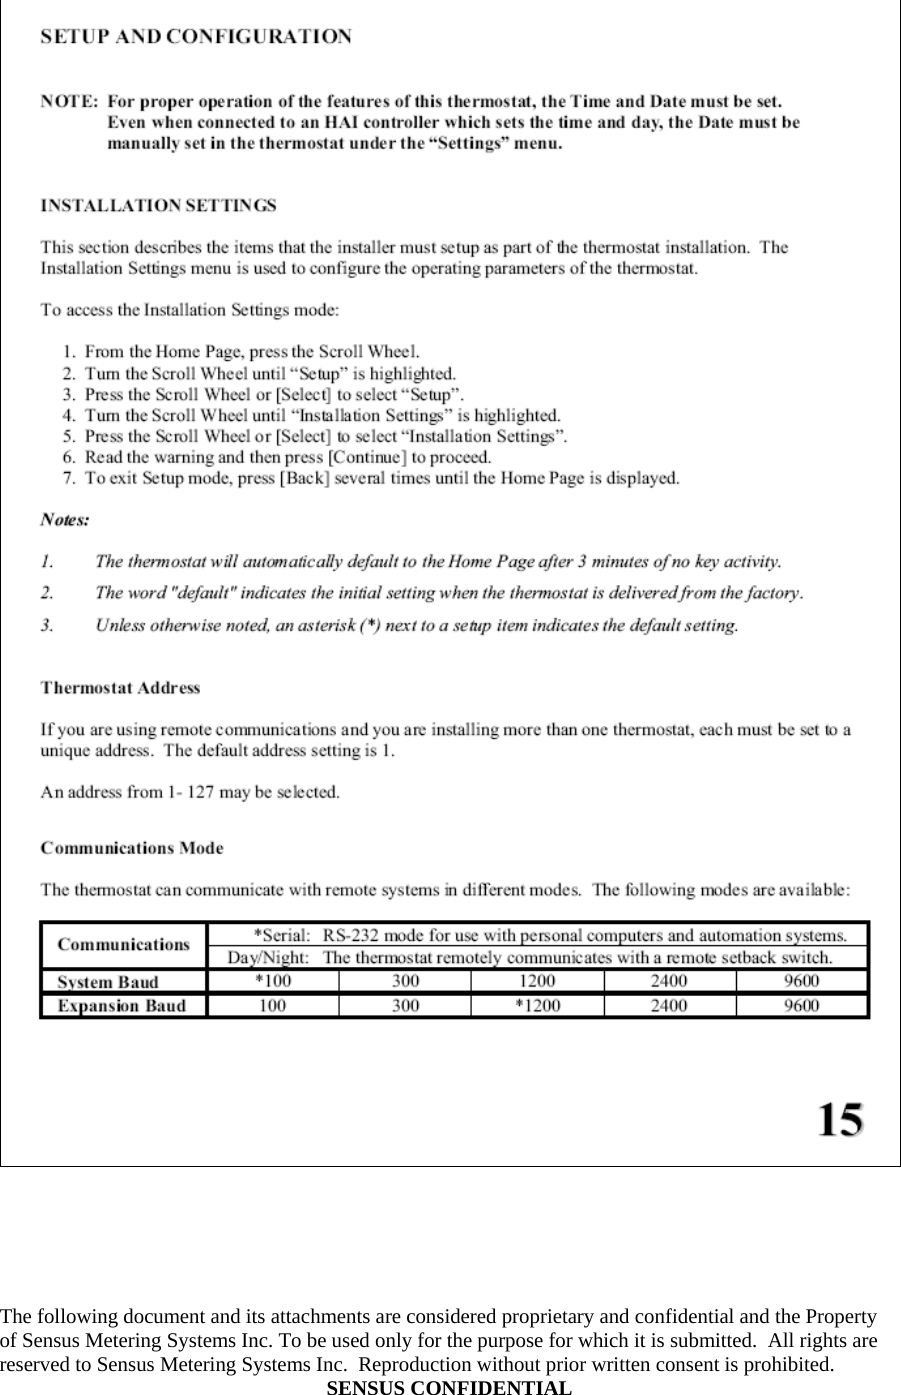  The following document and its attachments are considered proprietary and confidential and the Property of Sensus Metering Systems Inc. To be used only for the purpose for which it is submitted.  All rights are reserved to Sensus Metering Systems Inc.  Reproduction without prior written consent is prohibited. SENSUS CONFIDENTIAL    